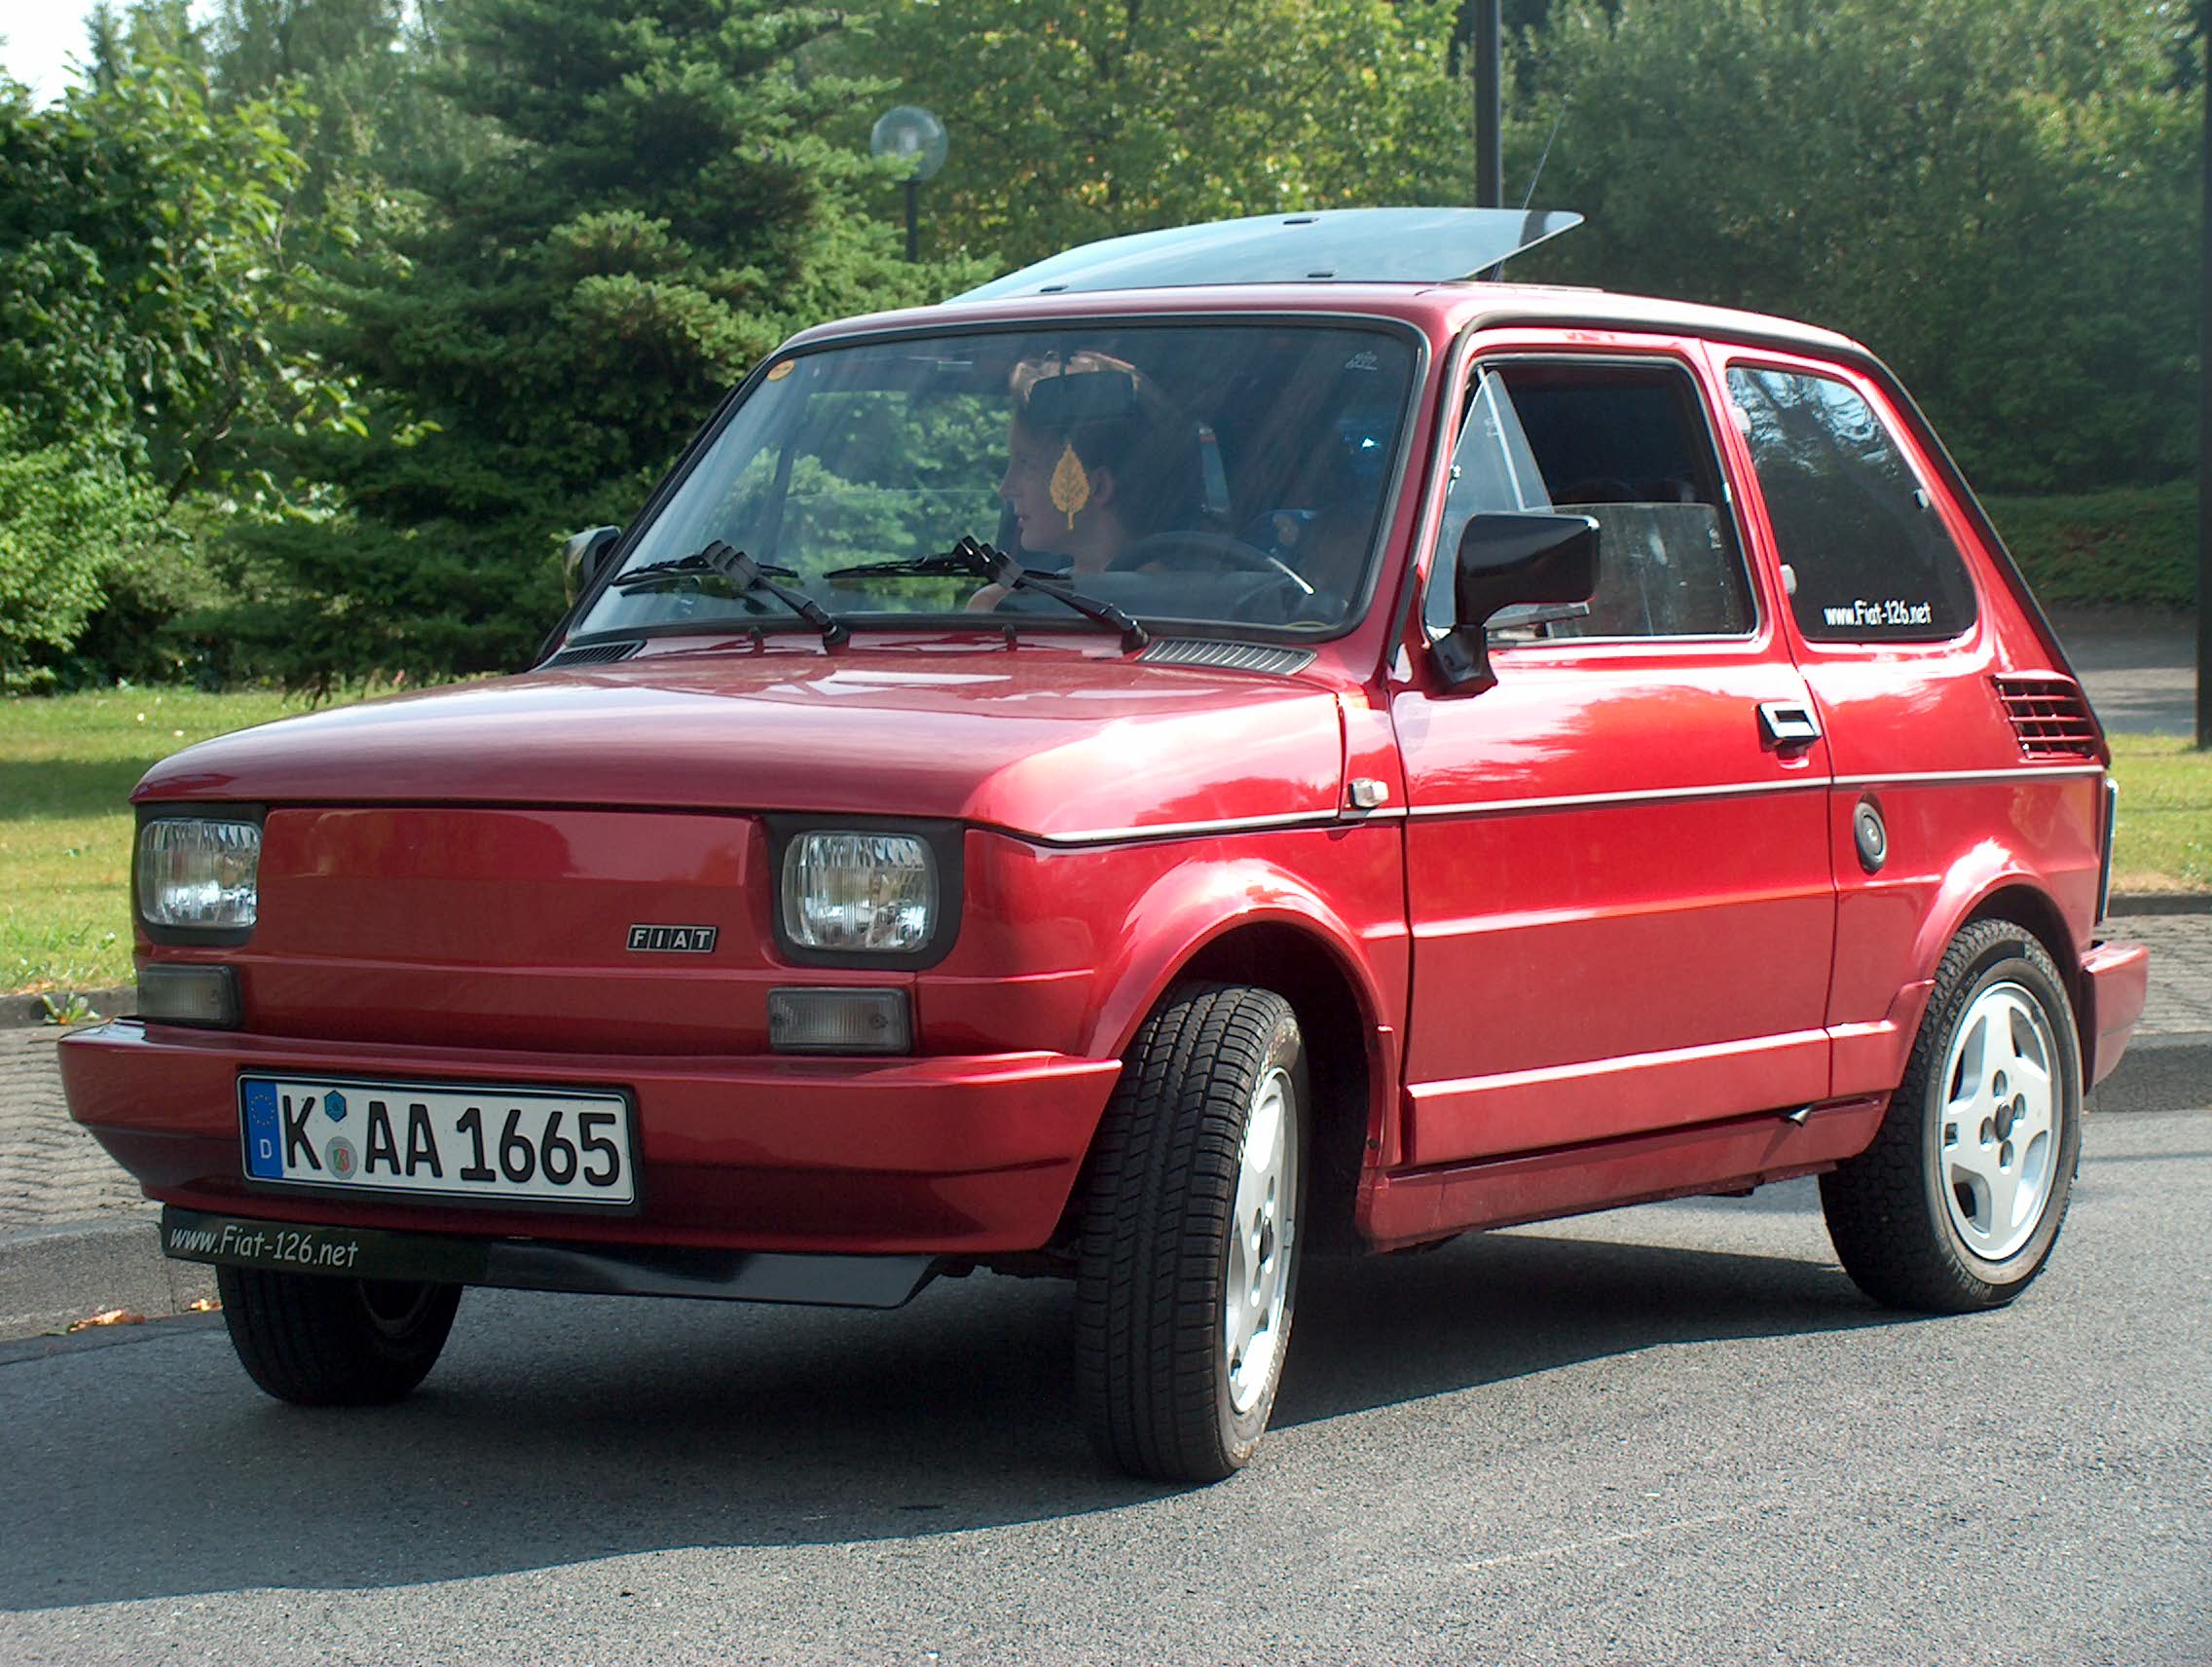 Fiat 126 BIS Author: bear. Date: 18.12.2012. Views: 14951. Car made in Italy